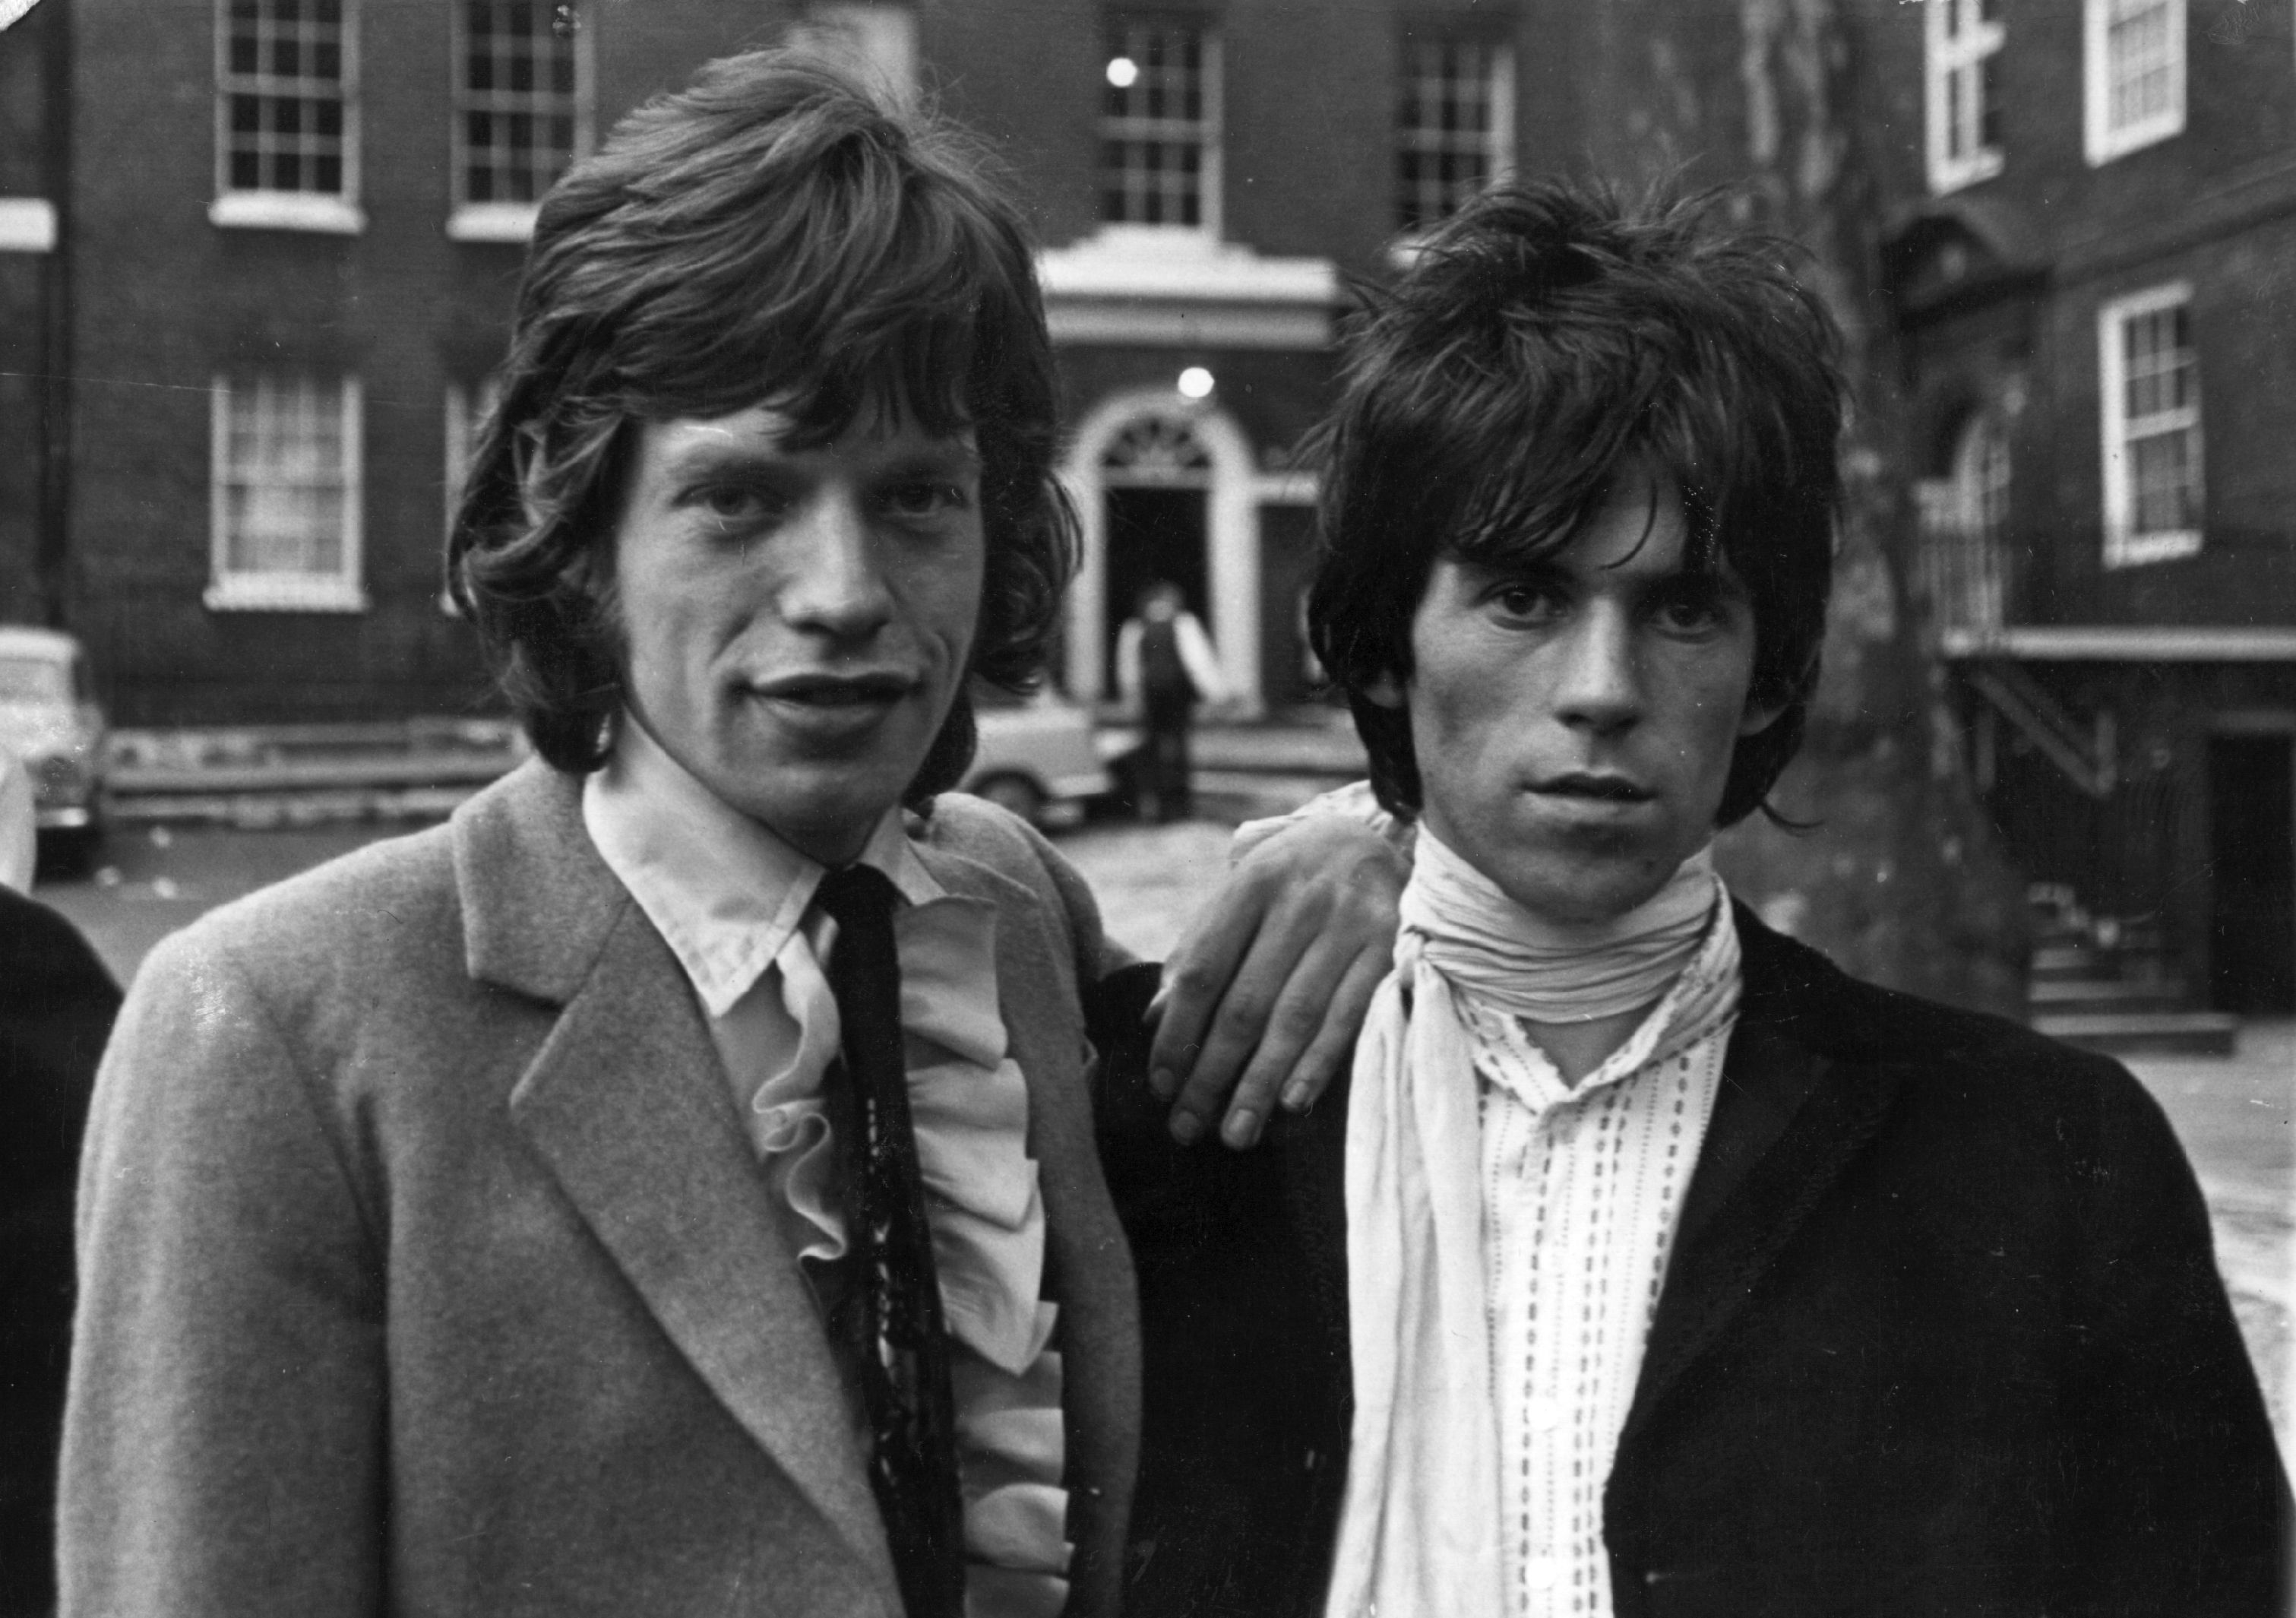 Mick Jagger with his hands on Keith Richards